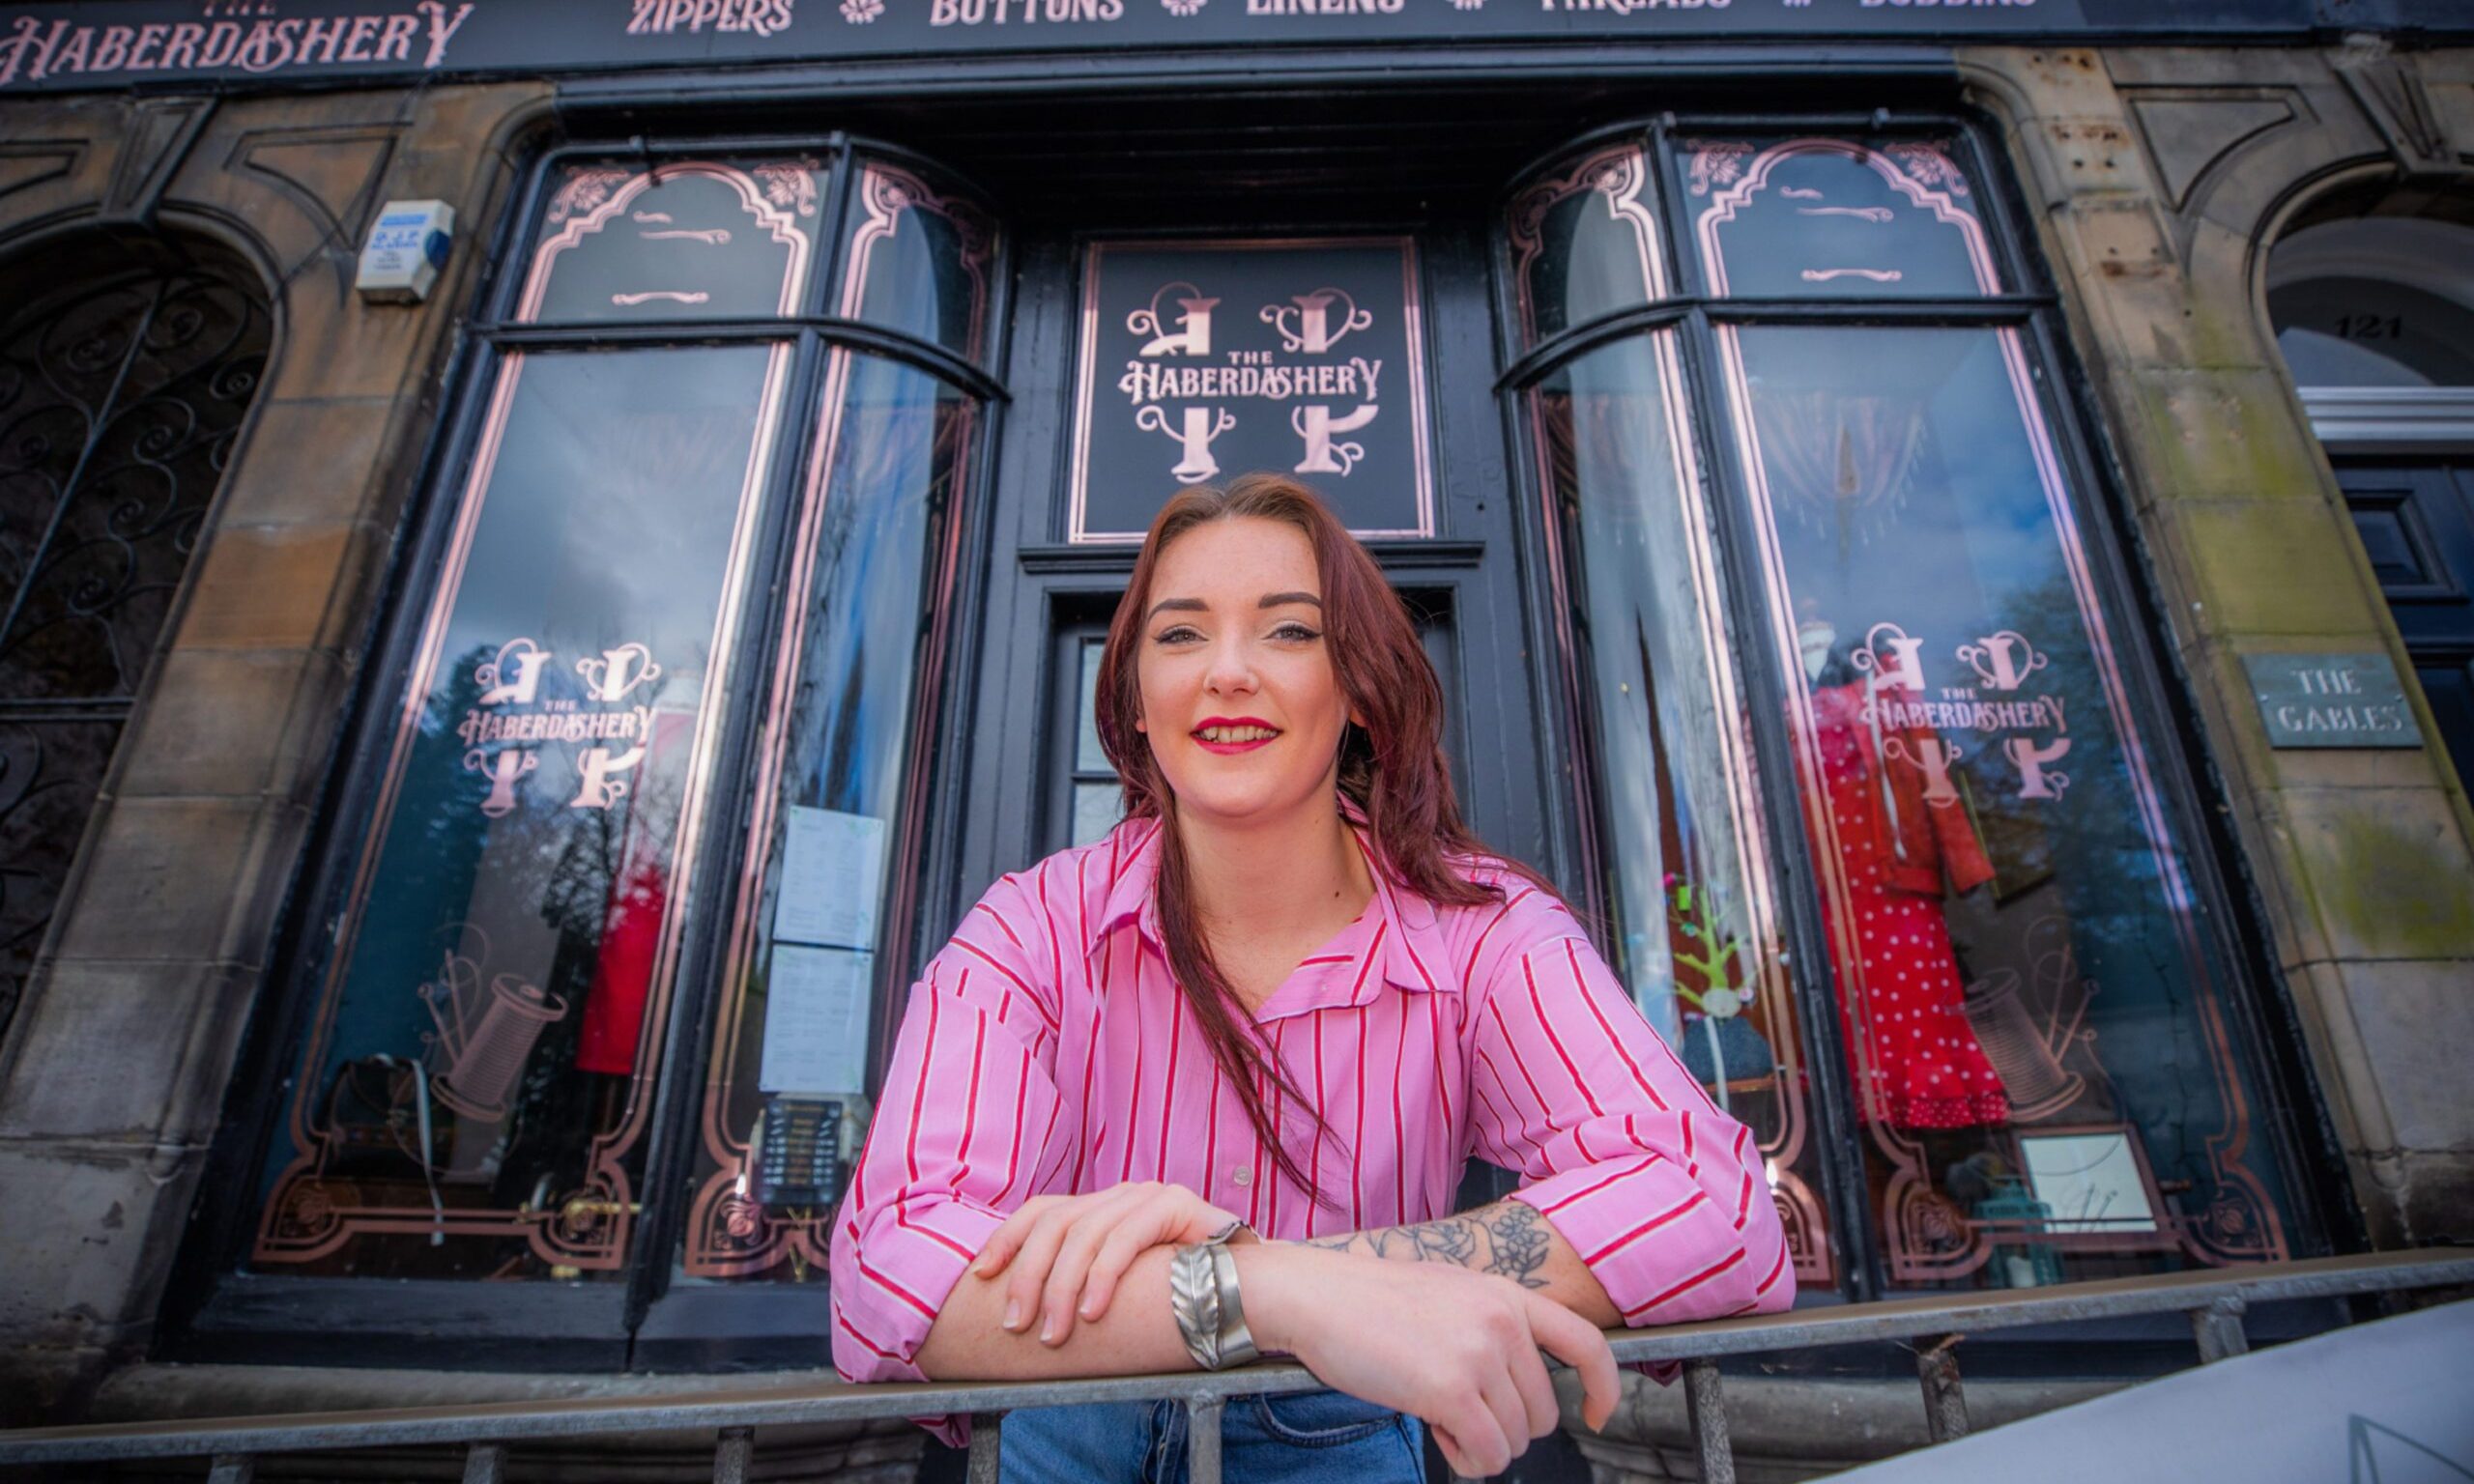 25-year-old Chloe on her ‘quirky’ bistro The Haberdashery in Dunfermline